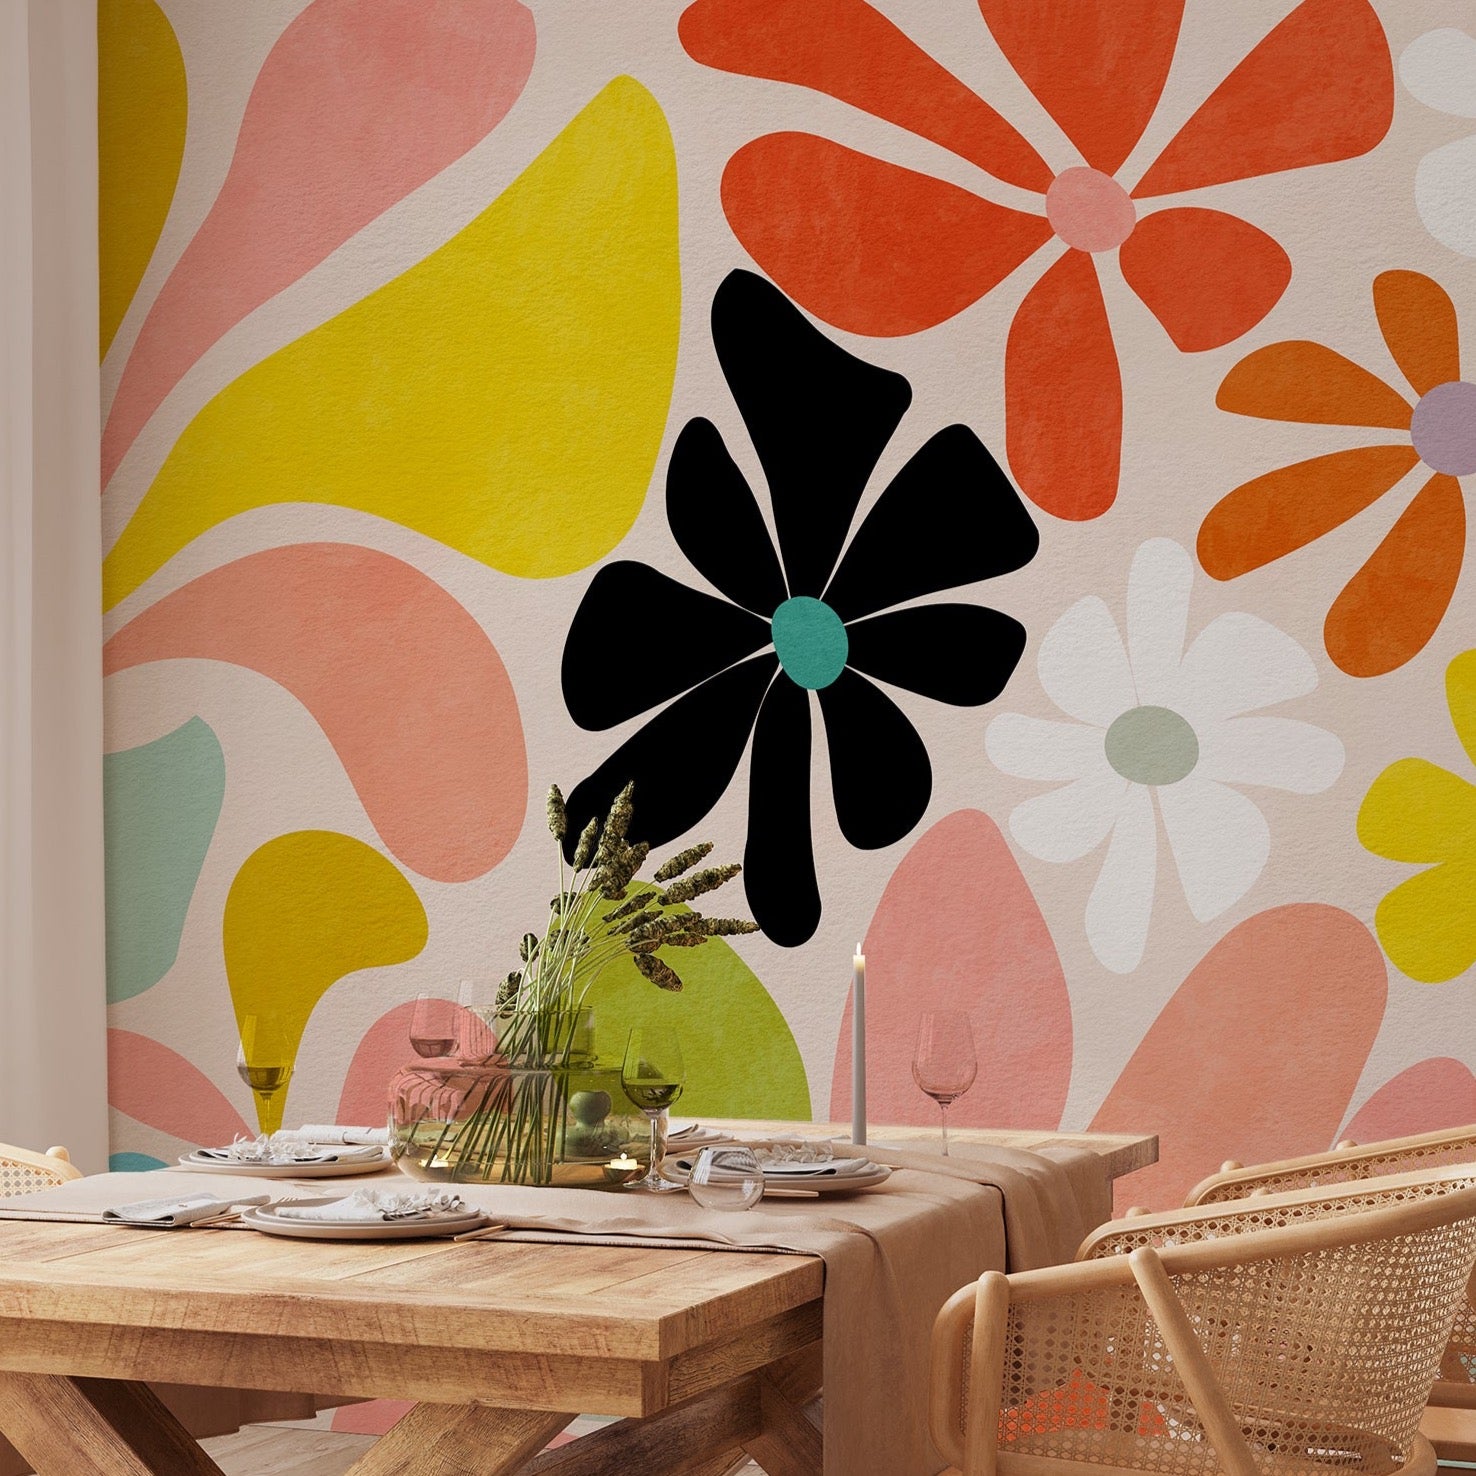 Flower Power Retro Wallpaper With Wooden Table and Chairs With Plants in Dining Room